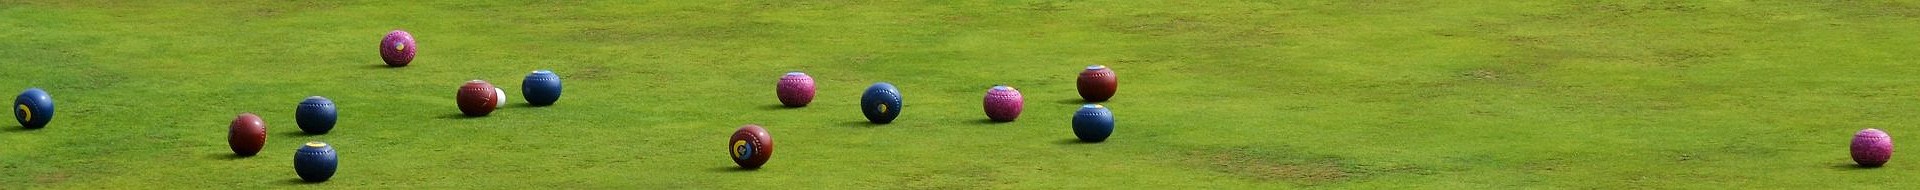 Calne Bowls Club Public Open Days – 22nd and 30th May 2021